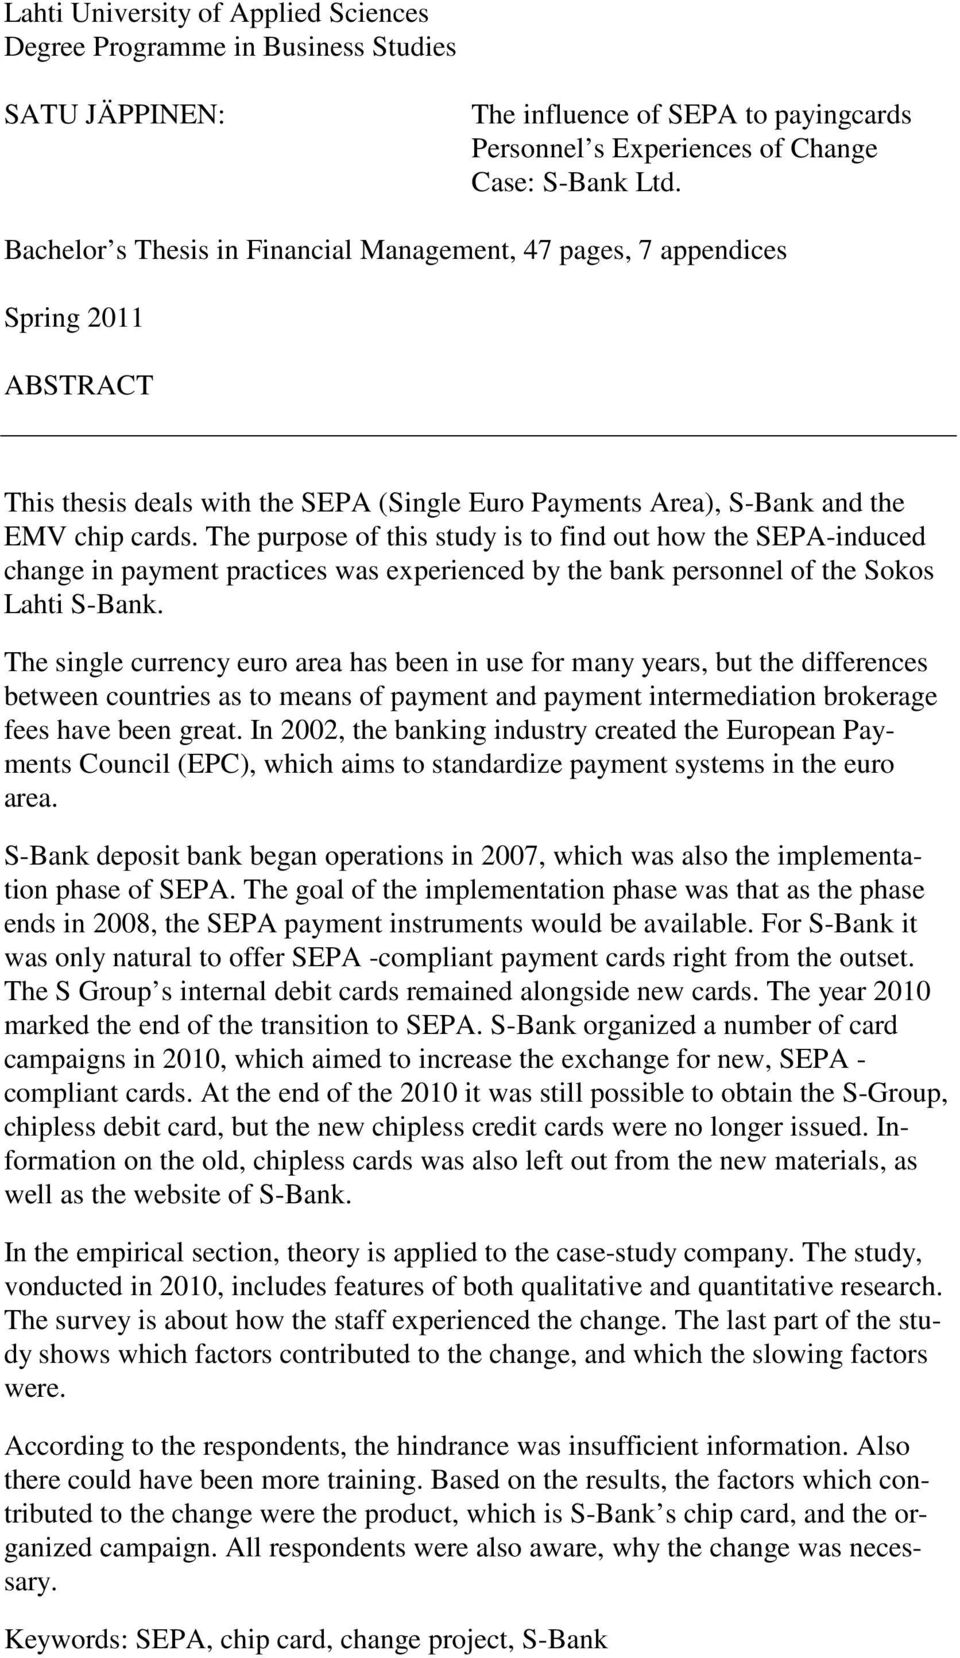 The purpose of this study is to find out how the SEPA-induced change in payment practices was experienced by the bank personnel of the Sokos Lahti S-Bank.